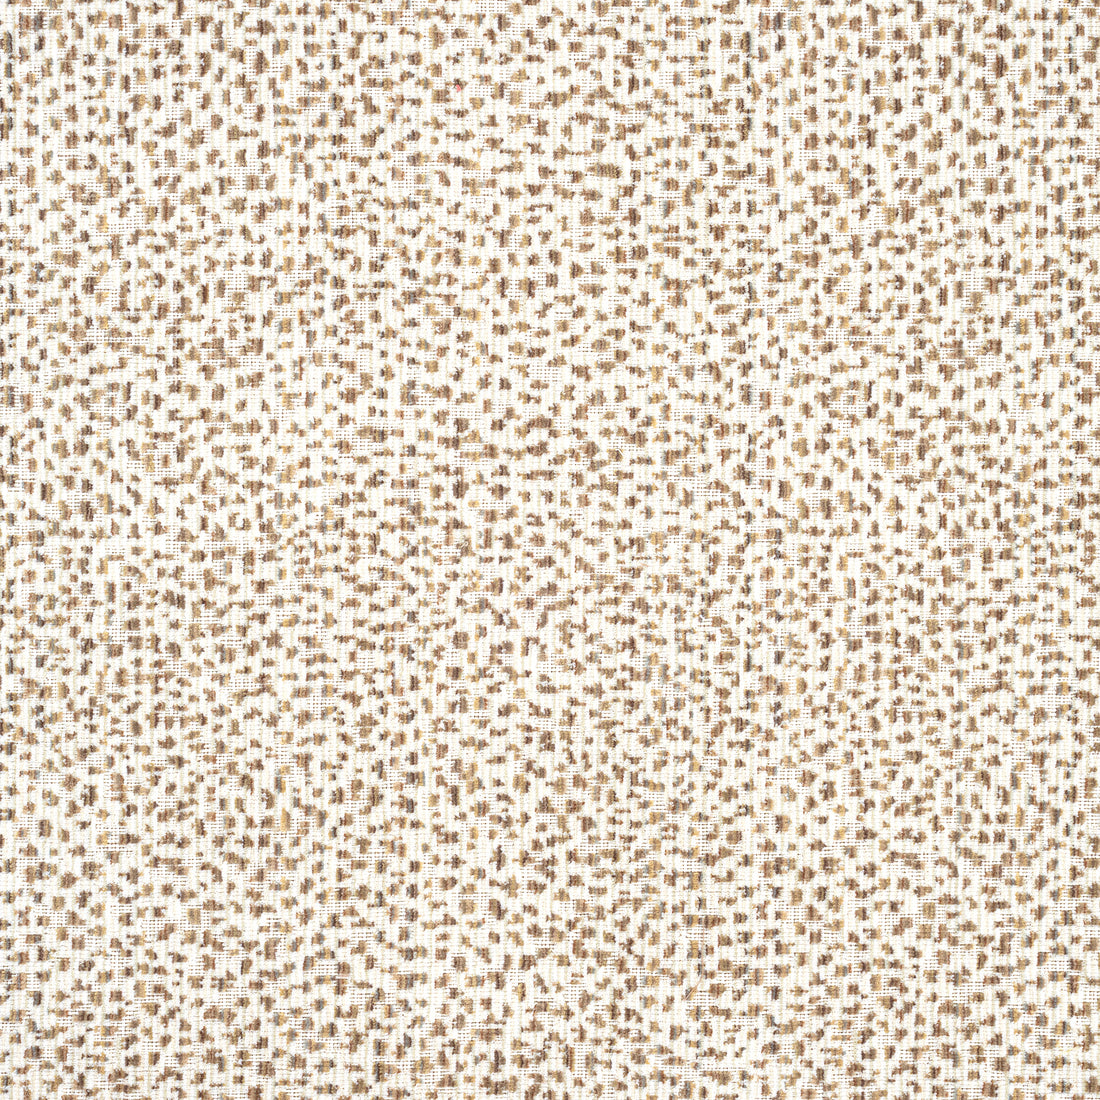 Swing Velvet fabric in grain color - pattern number W72806 - by Thibaut in the Woven Resource 13: Fusion Velvets collection